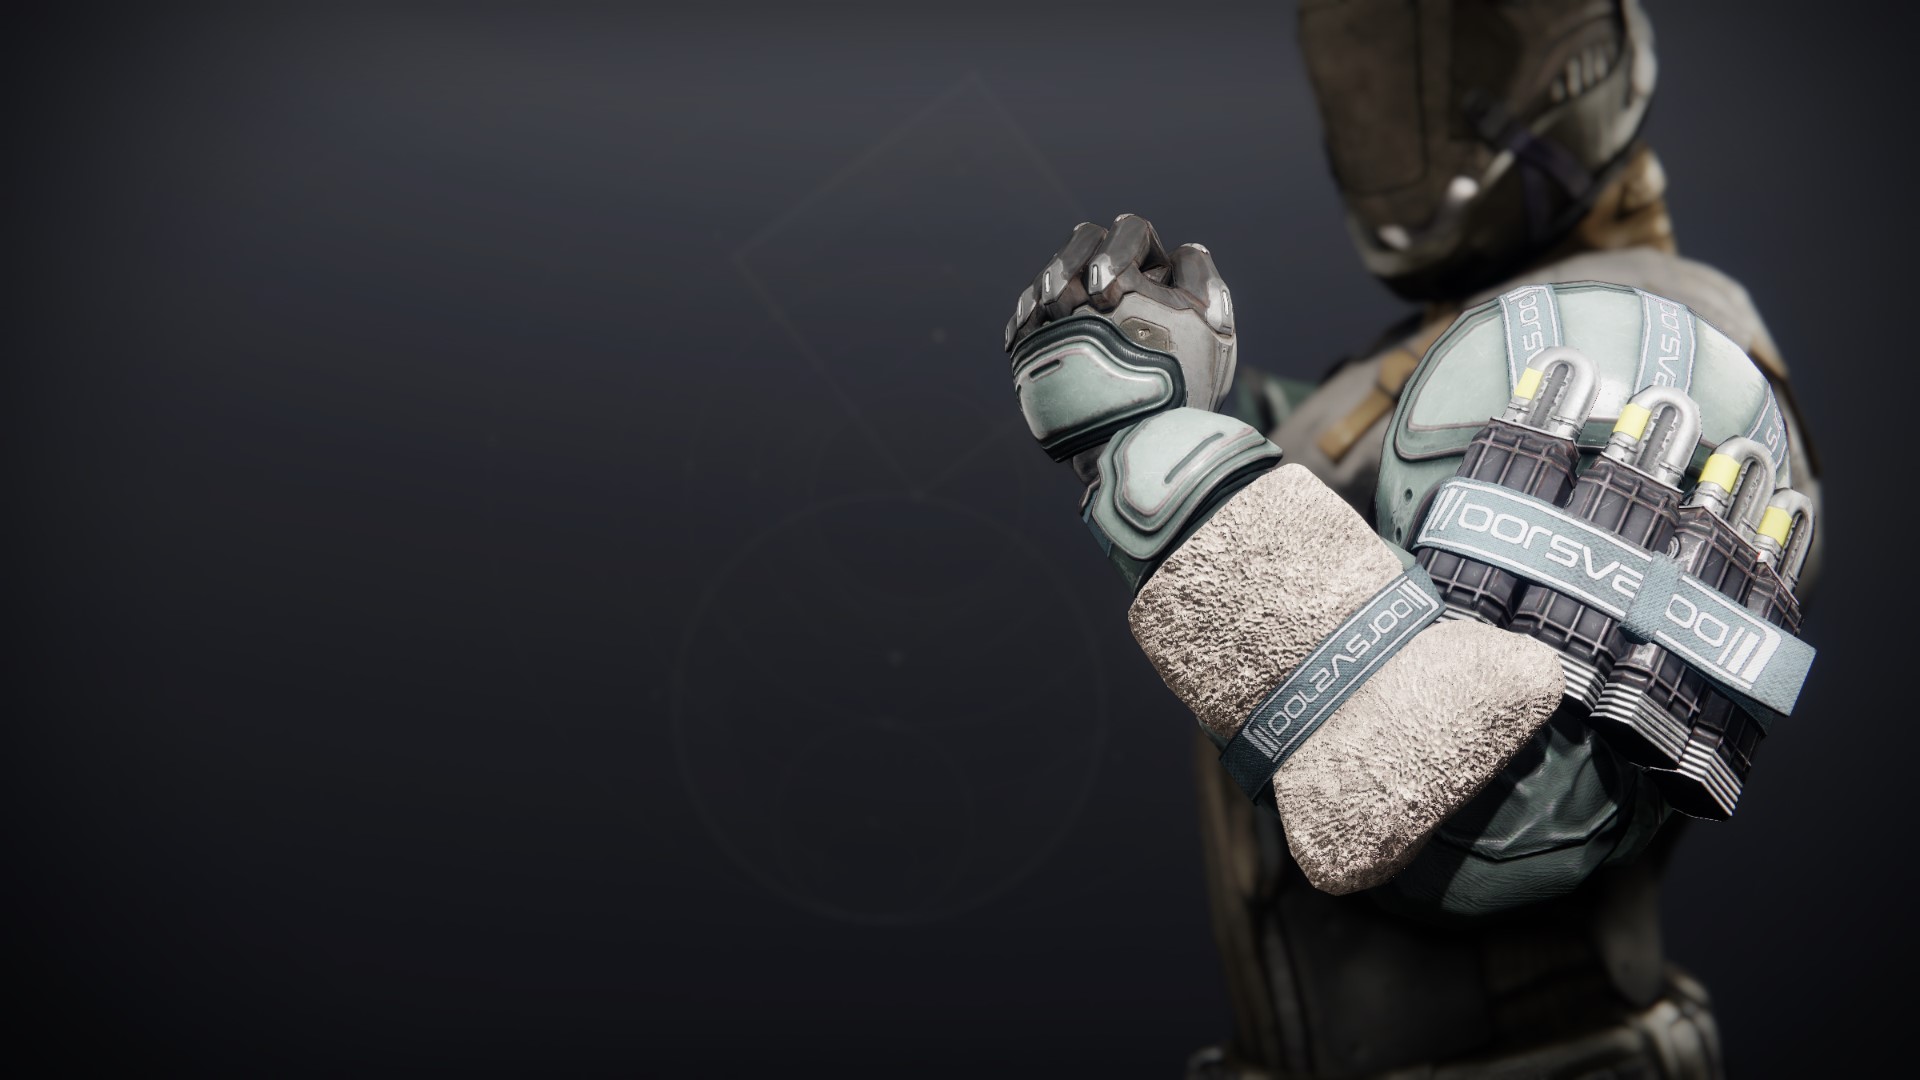 An in-game render of the Crystocrene Gauntlets.